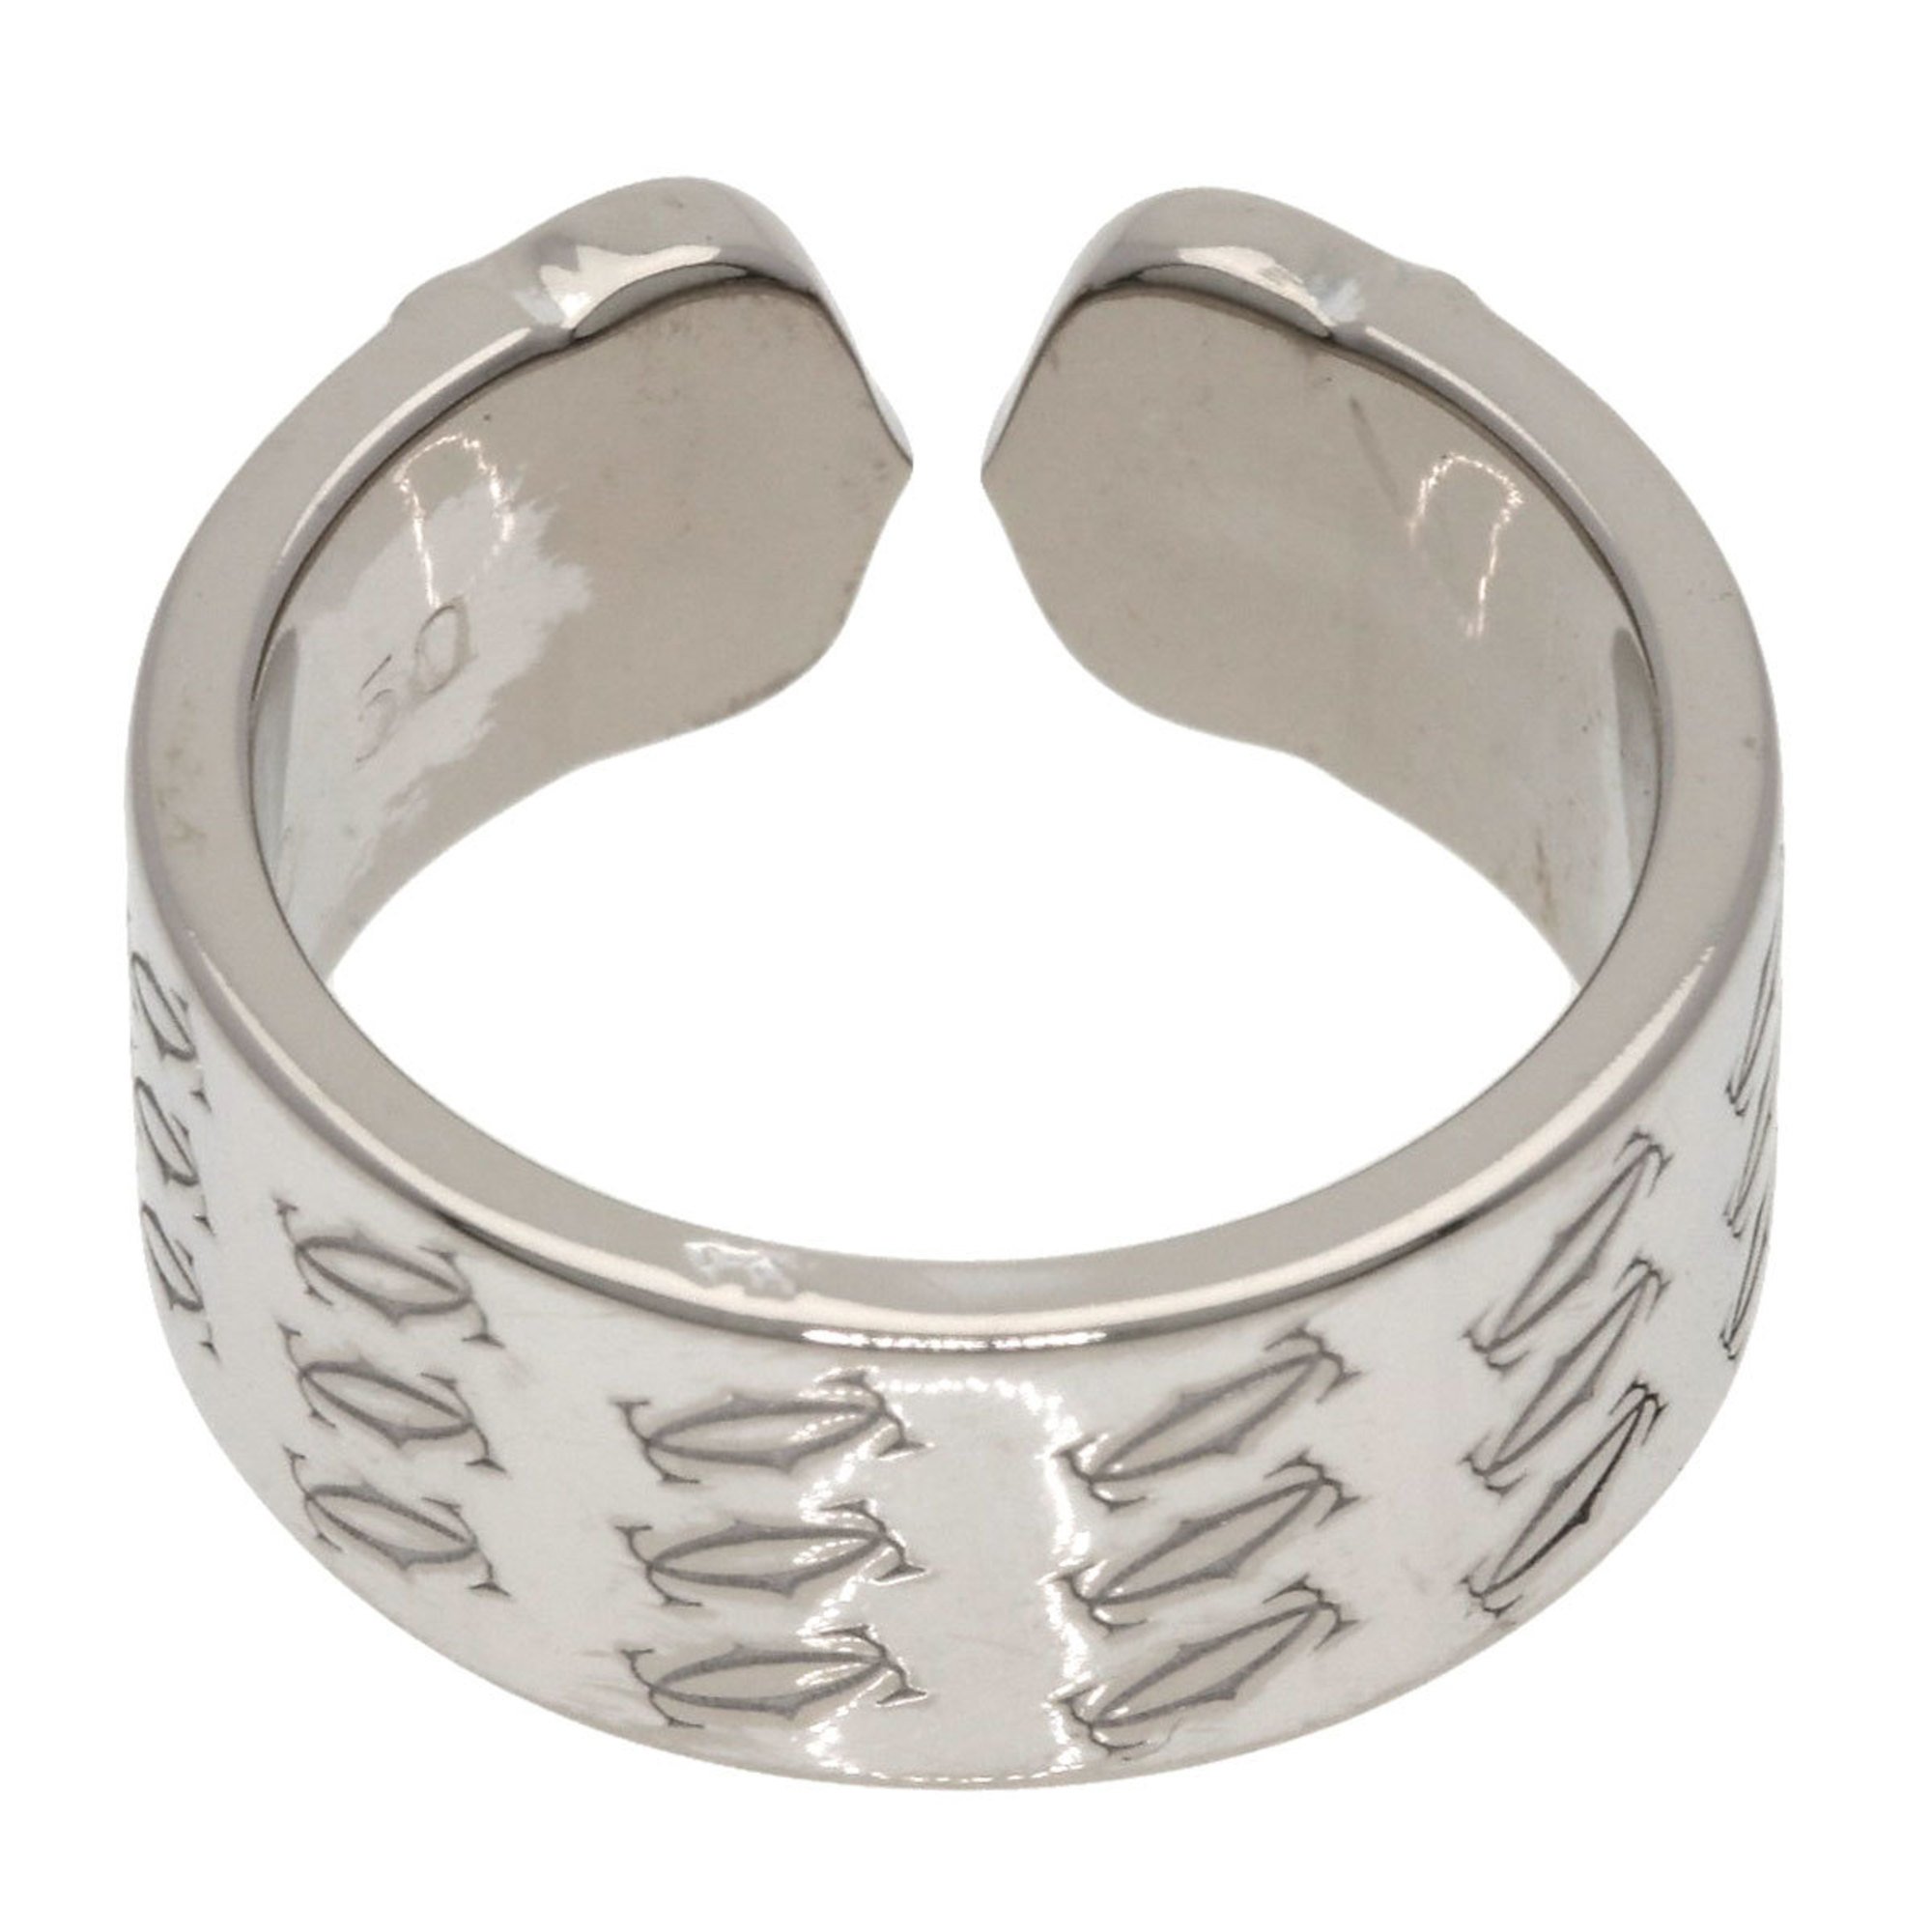 Cartier 2C Ring 2000 Limited Edition #50 K18 White Gold Ladies CARTIER